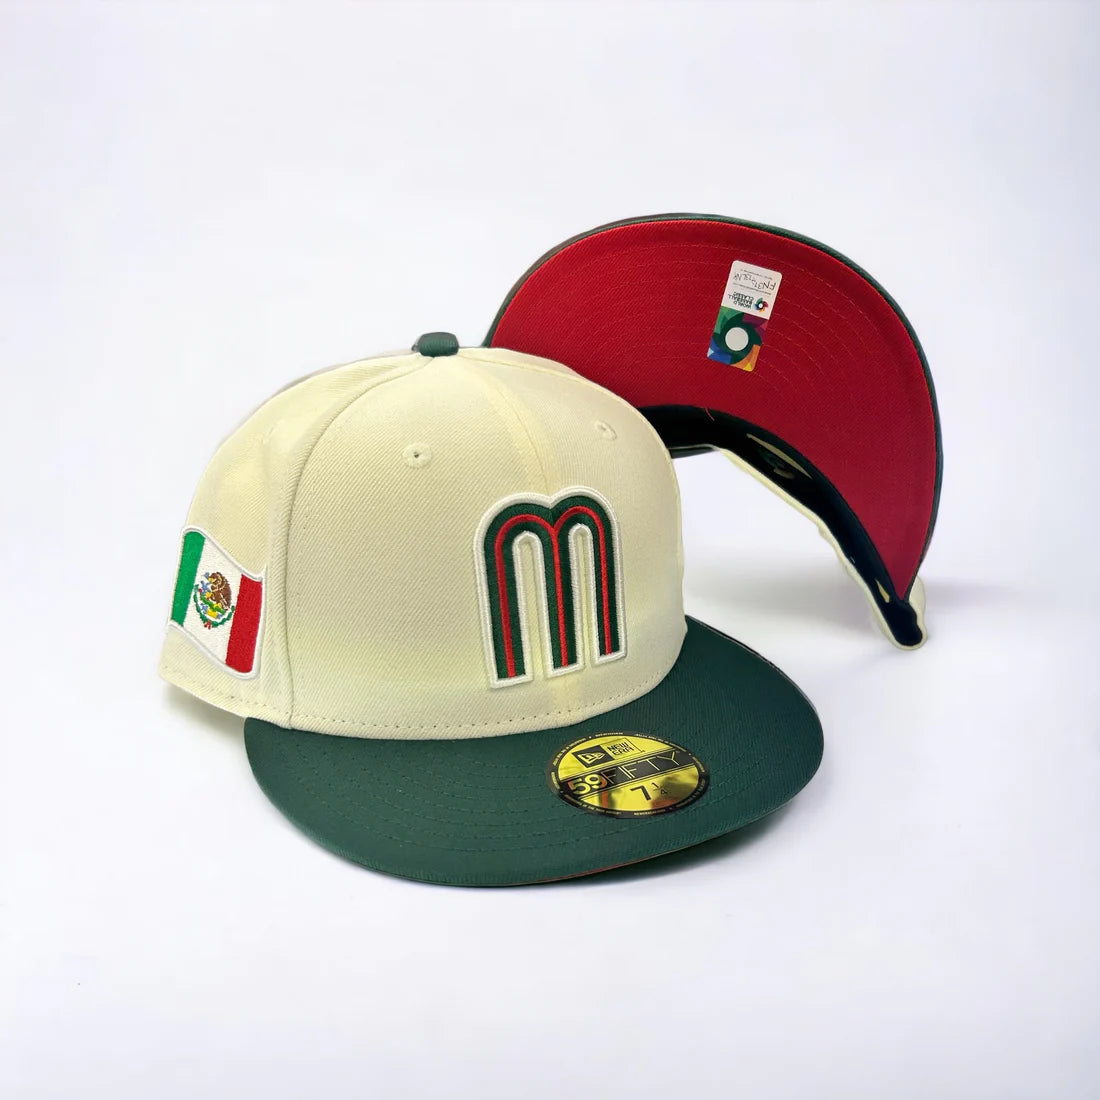 Chrome and dark Green Mexico New Era Fitted Hat – BeisbolMXShop